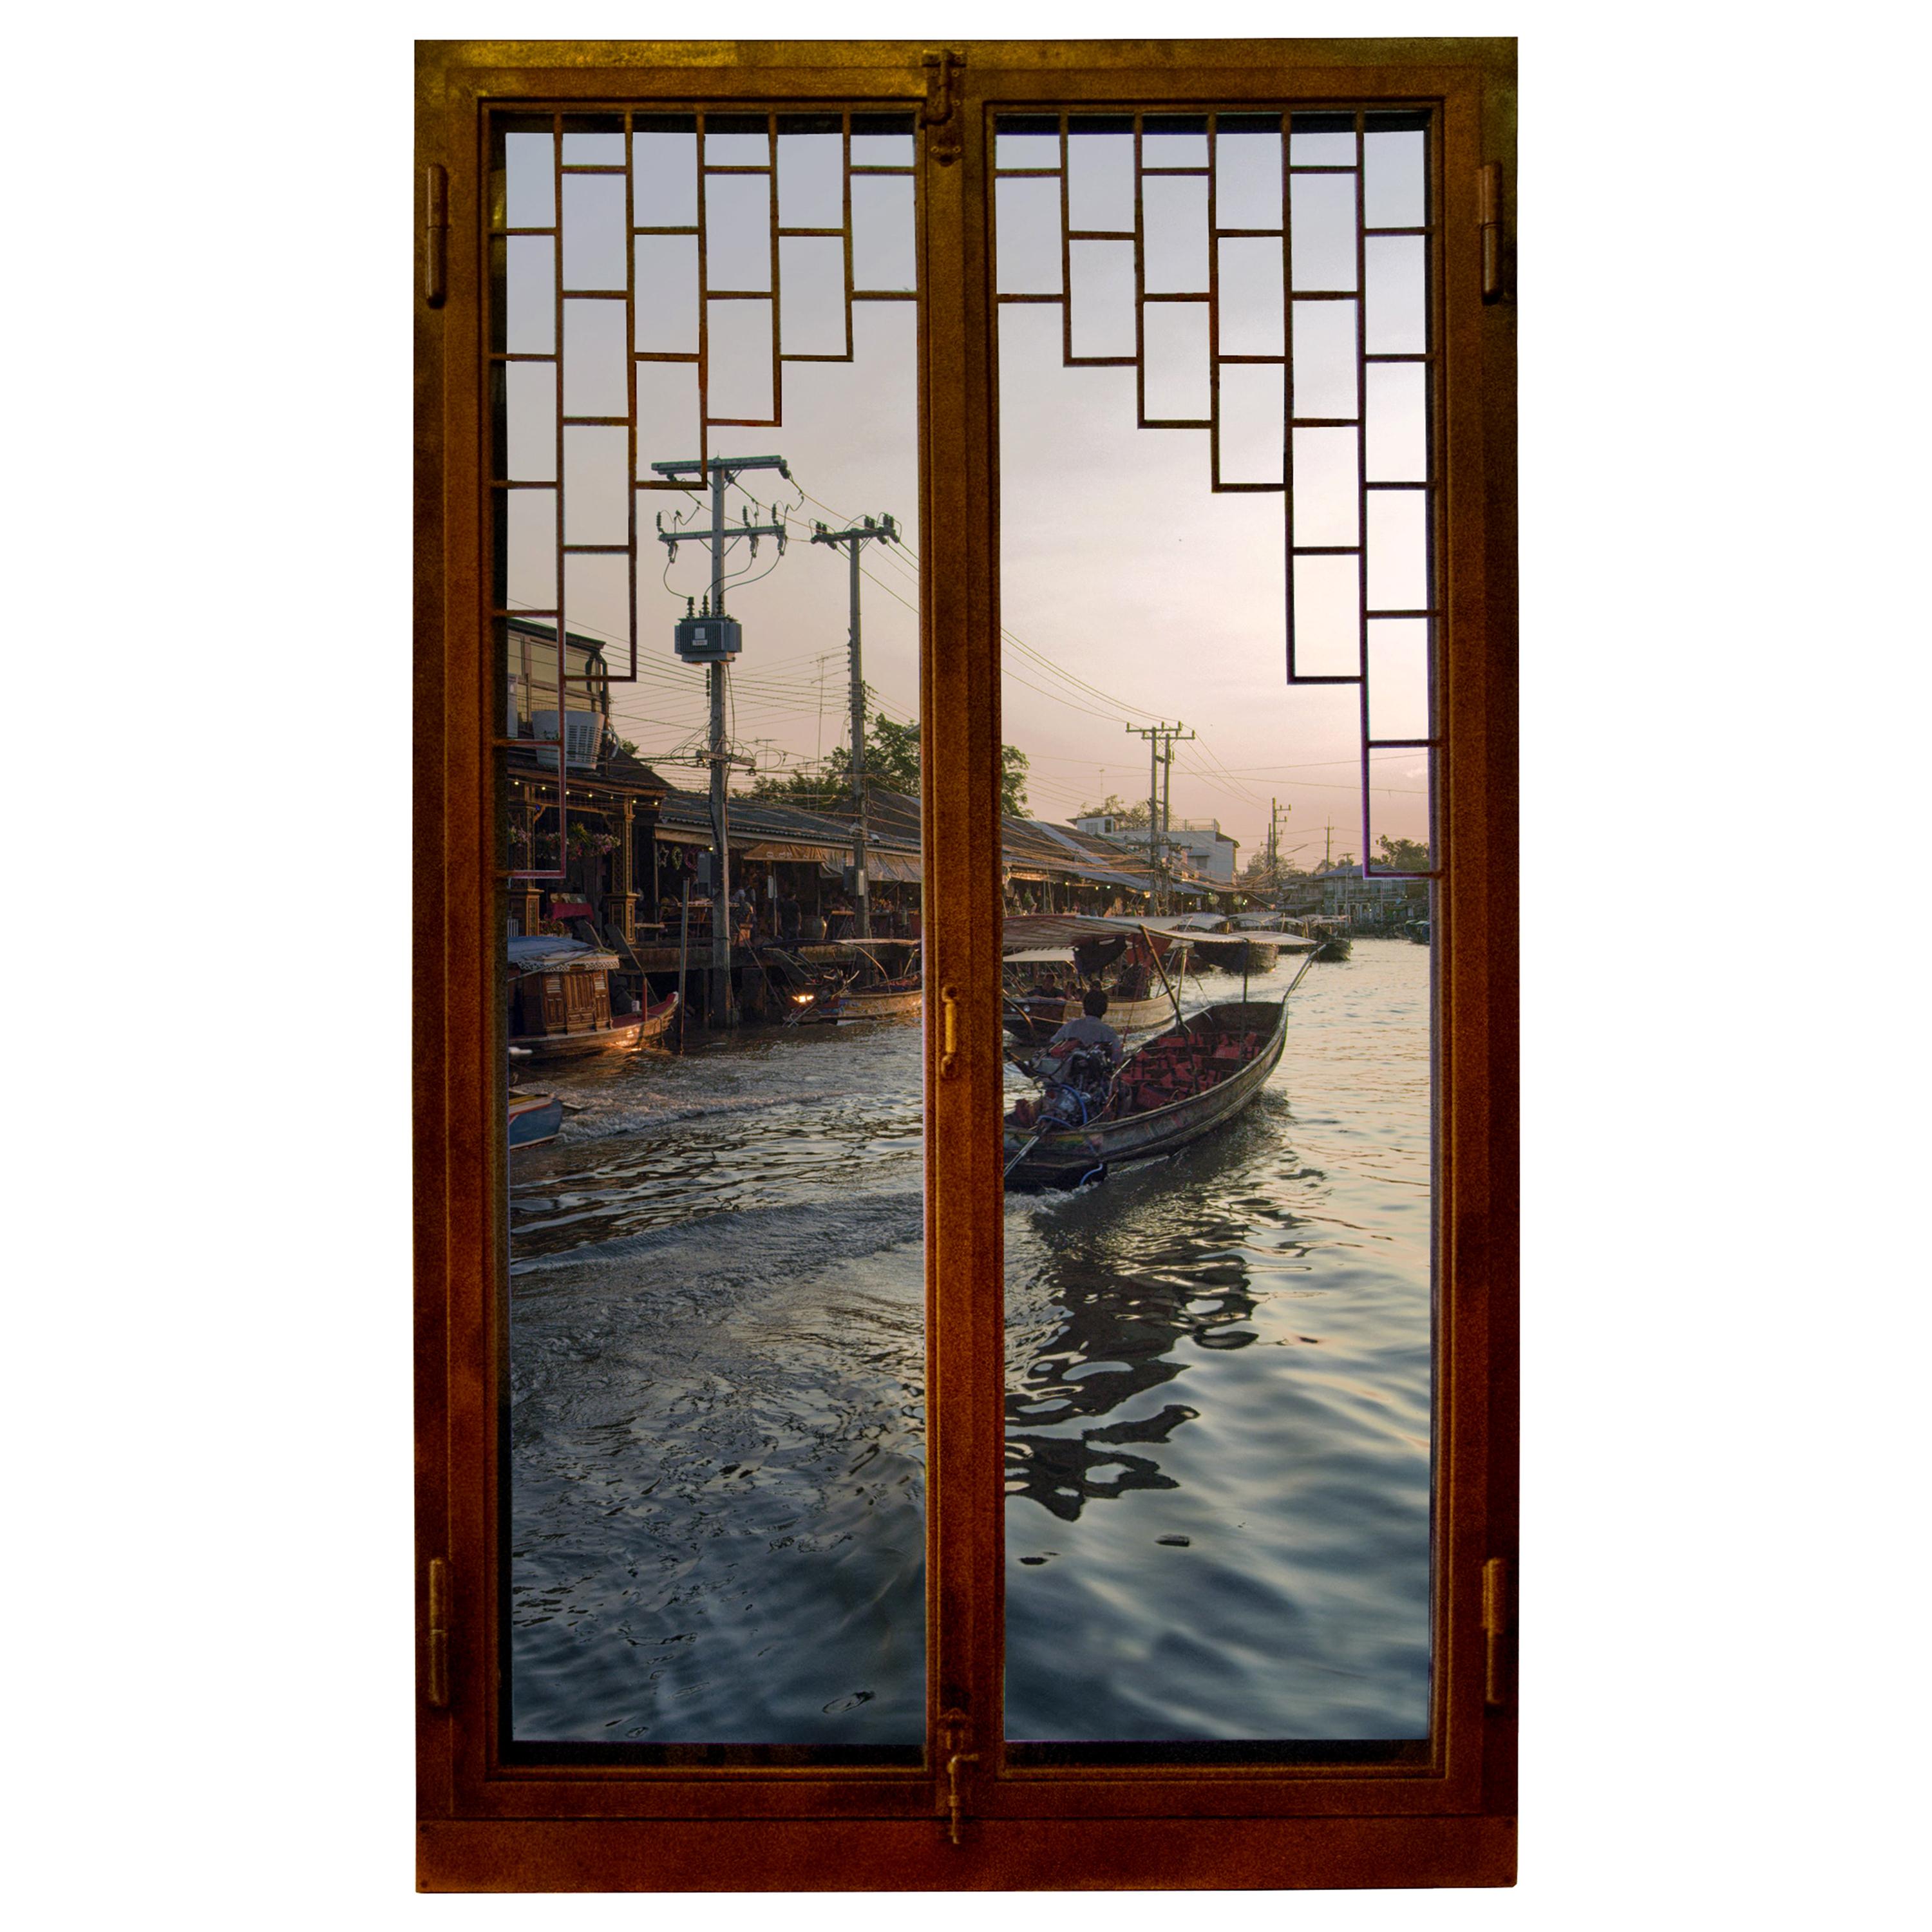 Anotherview No.17, a Sunday by the Mae Klong River by Anotherview For Sale